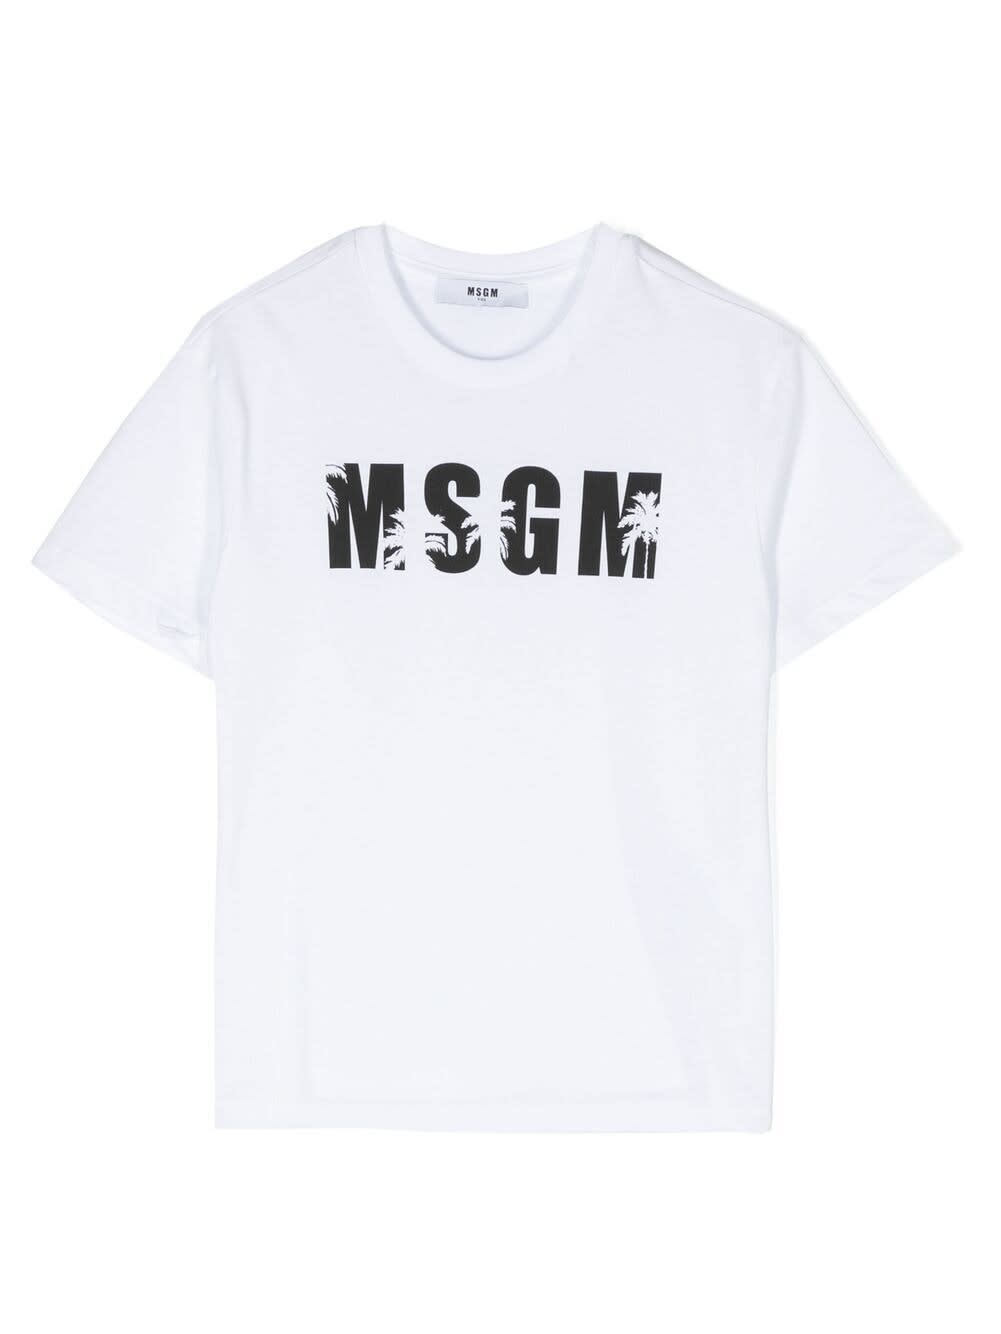 MSGM WHITE T-SHIRT WITH LOGO AND PALM TREES